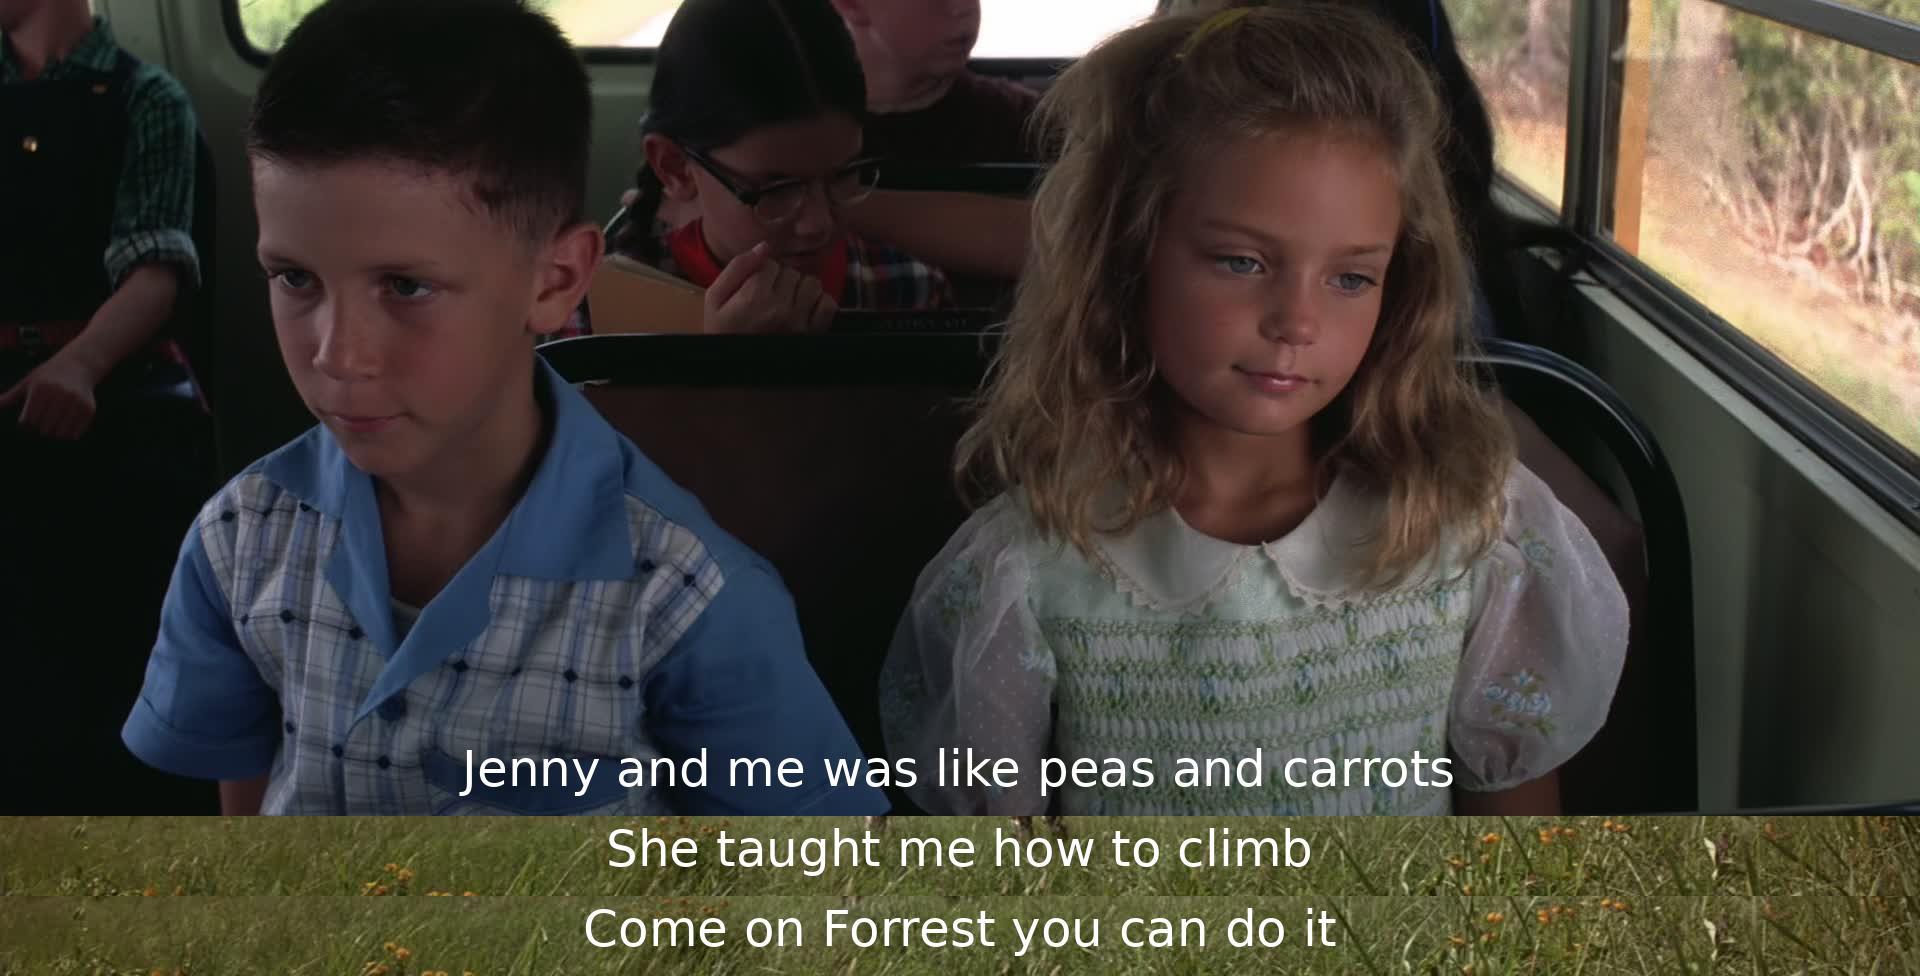 Jenny and Forrest had a close bond, like peas and carrots. She encouraged Forrest to climb, believing in his abilities.